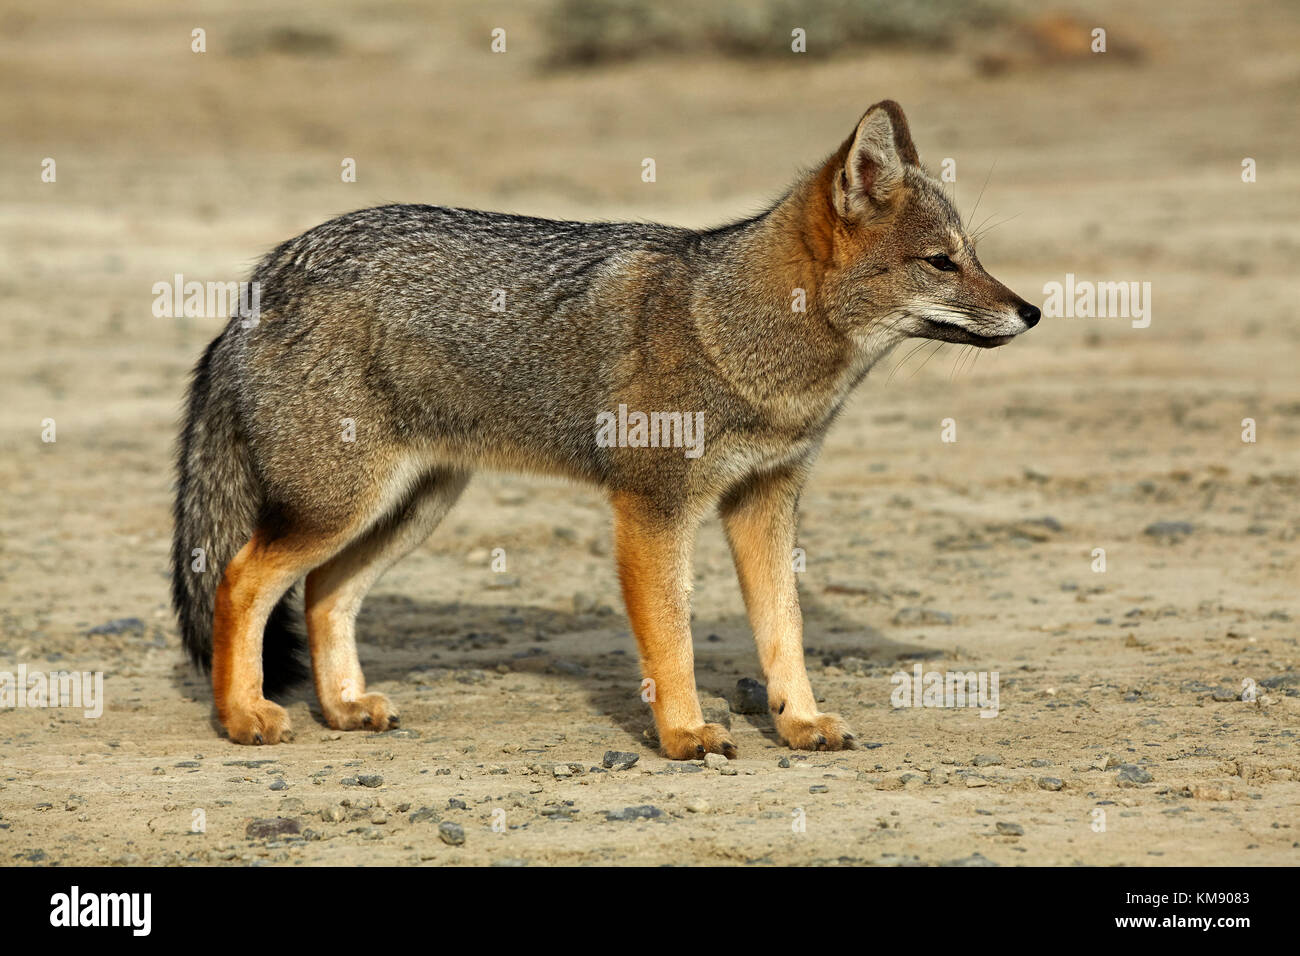 South American gray fox (Lycalopex griseus), Patagonia, Argentina, South America Stock Photo